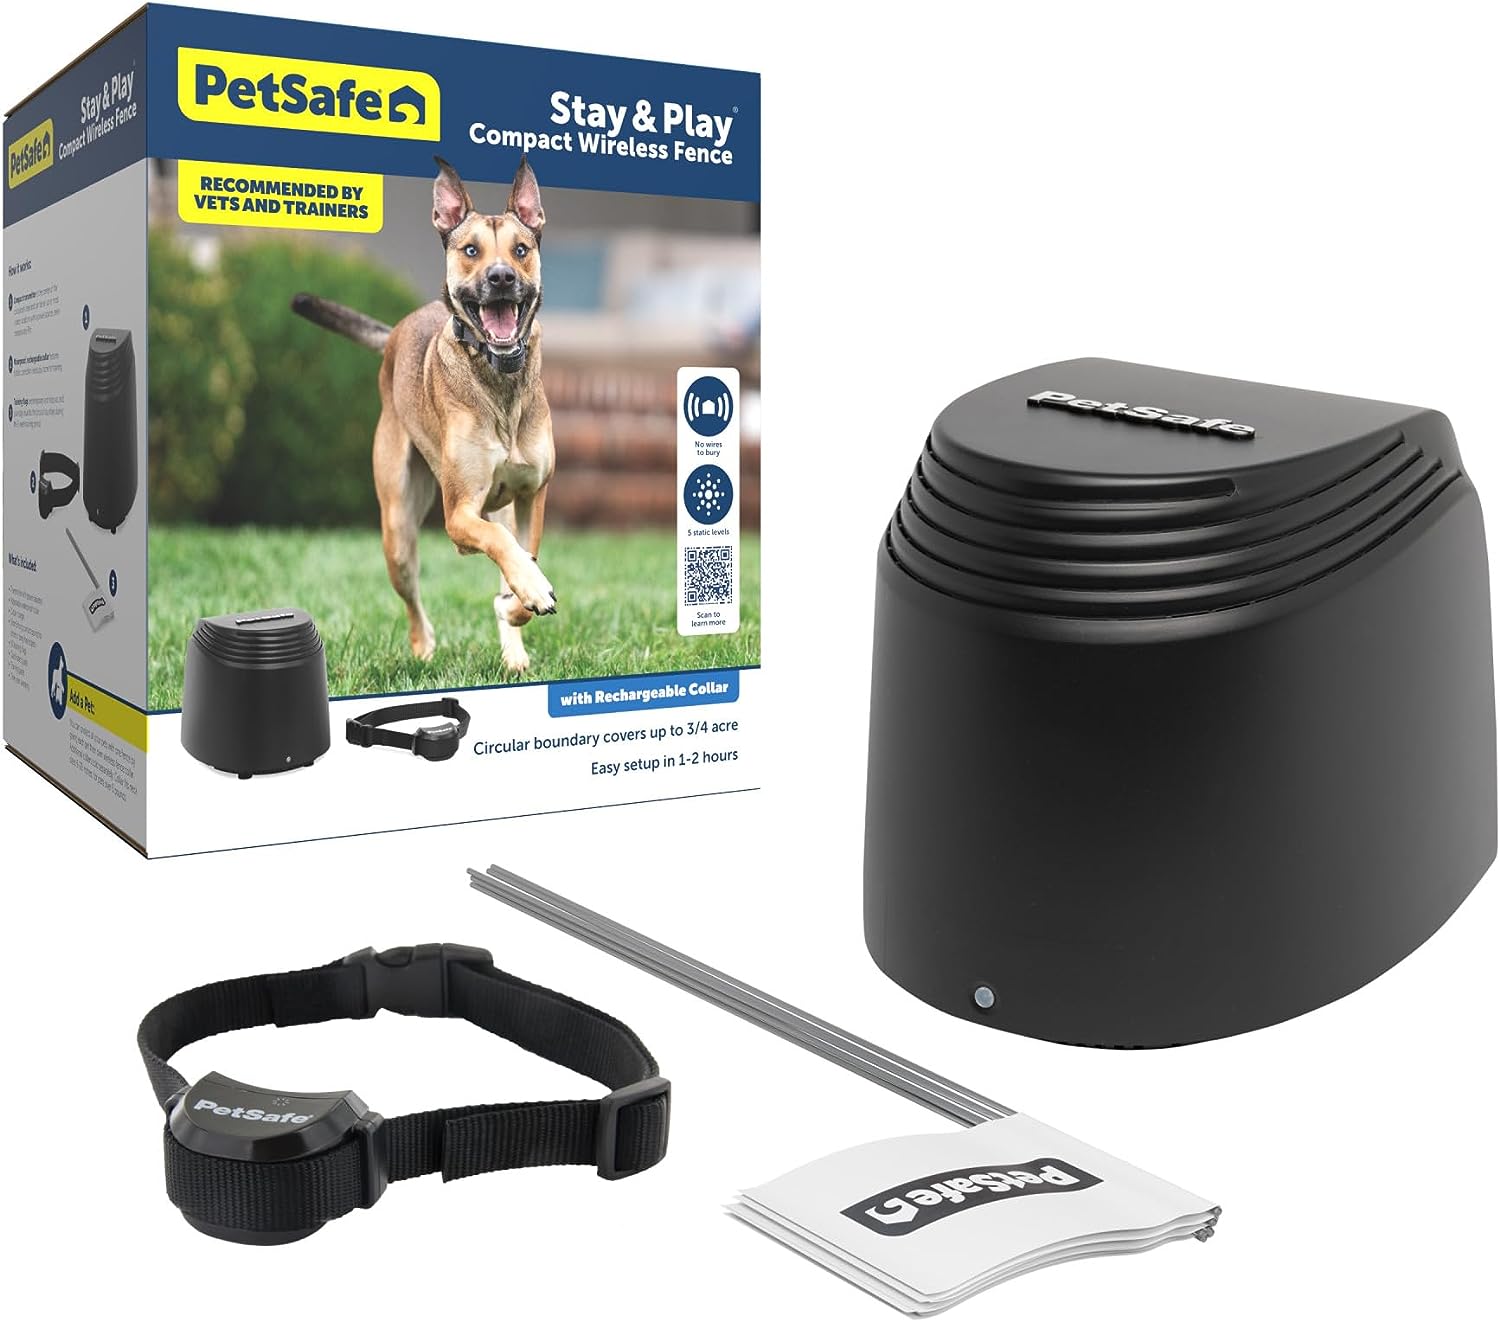 PetSafe Stay & Play Compact Wireless Pet Fence Review